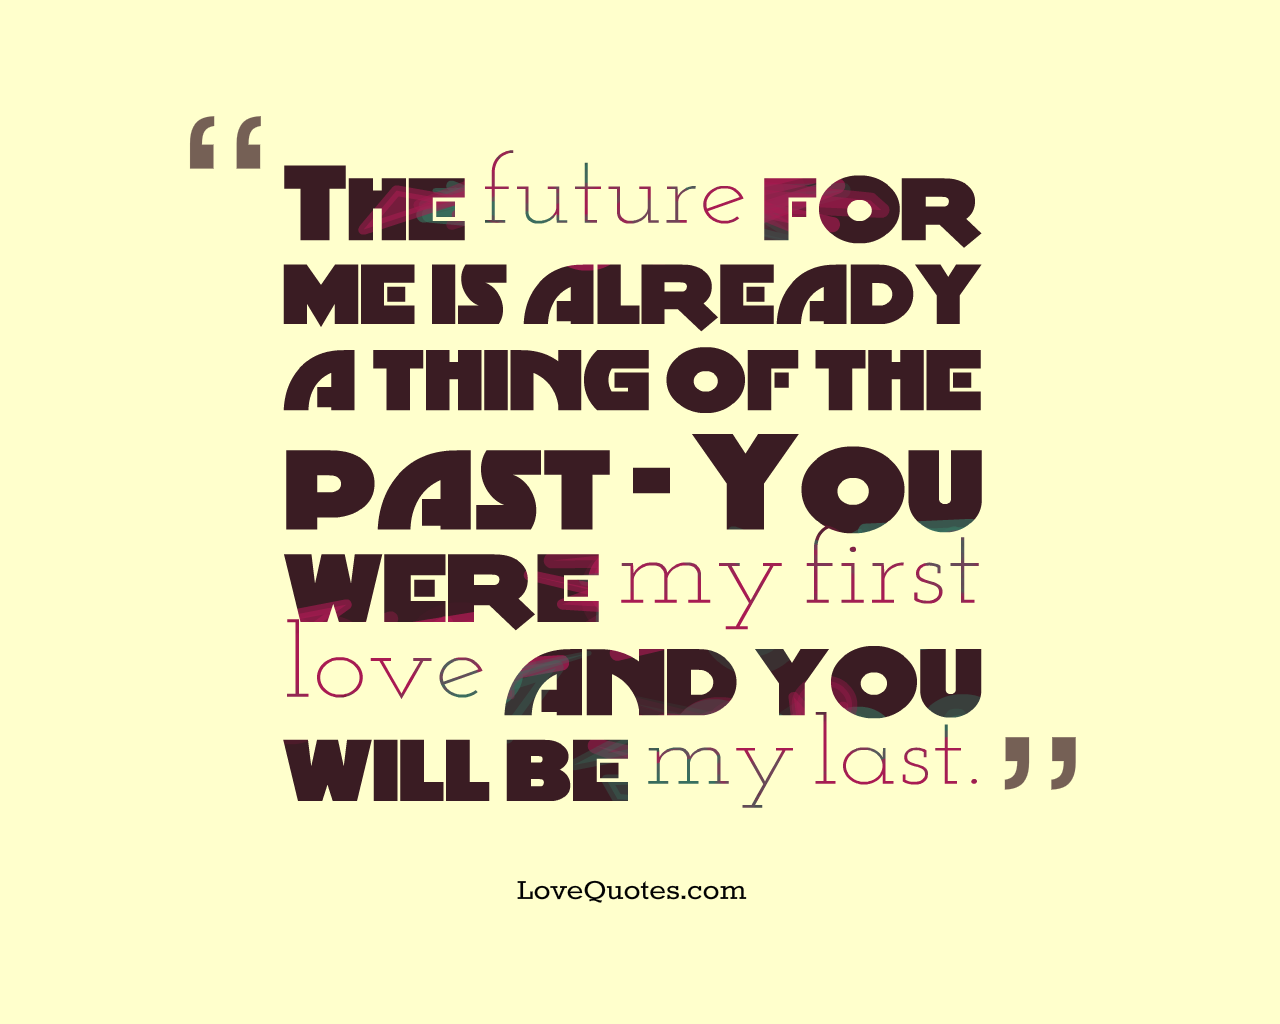 first love quotes